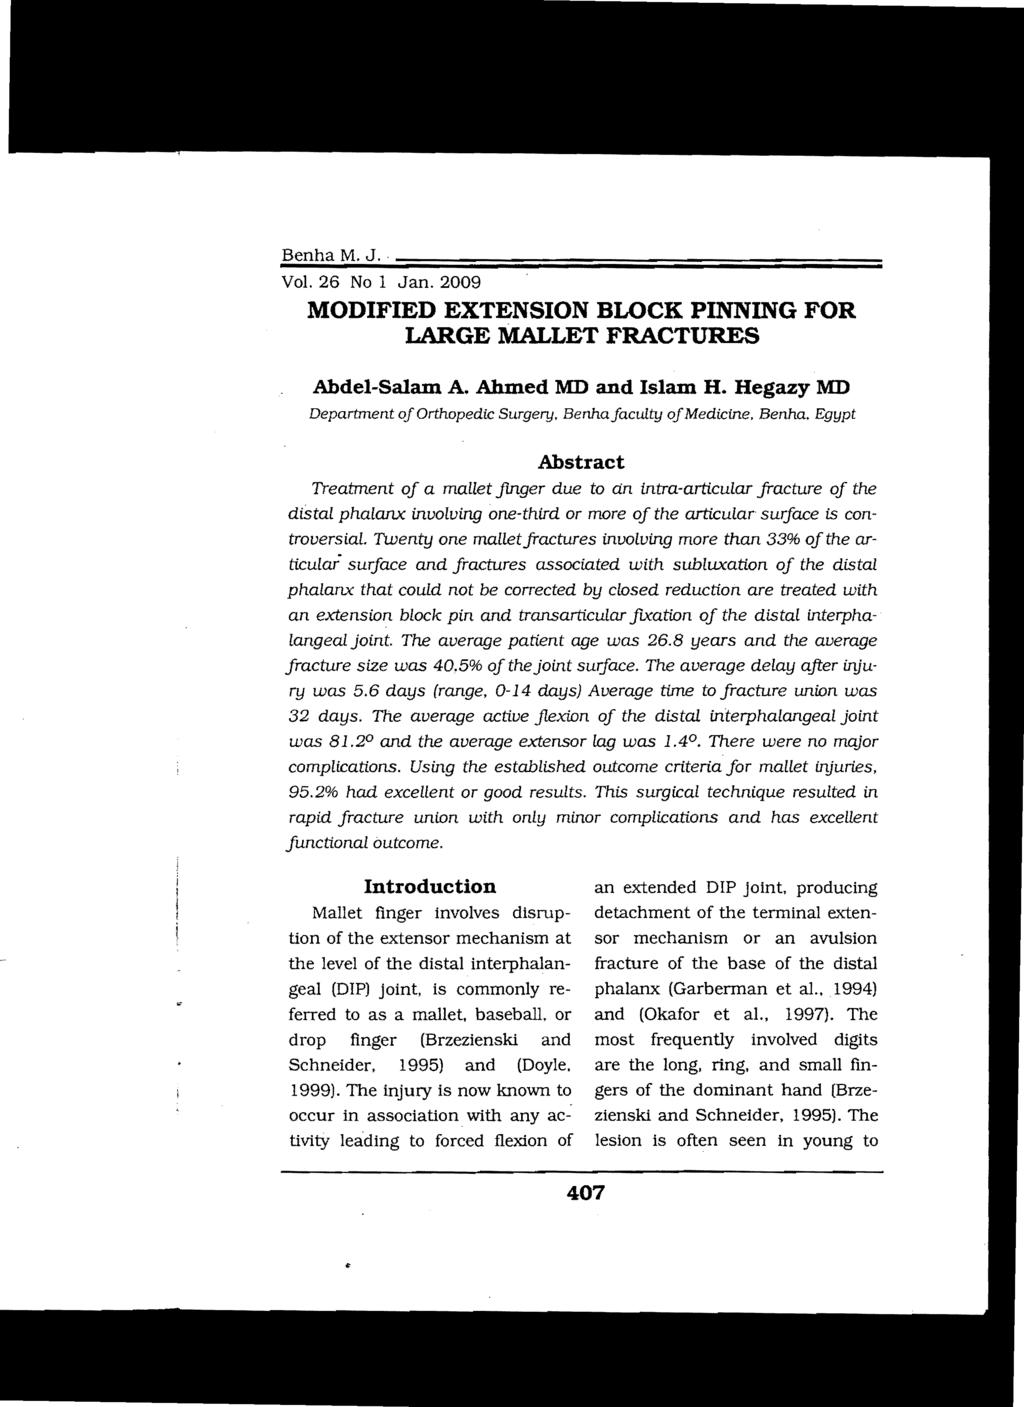 Benha M. J.. Vol. 26 No 1 Jan. 2009 MODIFIED EXTENSION BLOCK PINNING FOR LARGE MALLET FRACTURES Abdel-Salam A. Ahmed MD and Islam H. Hegazy MD Department oj Orthopedic Surgery.